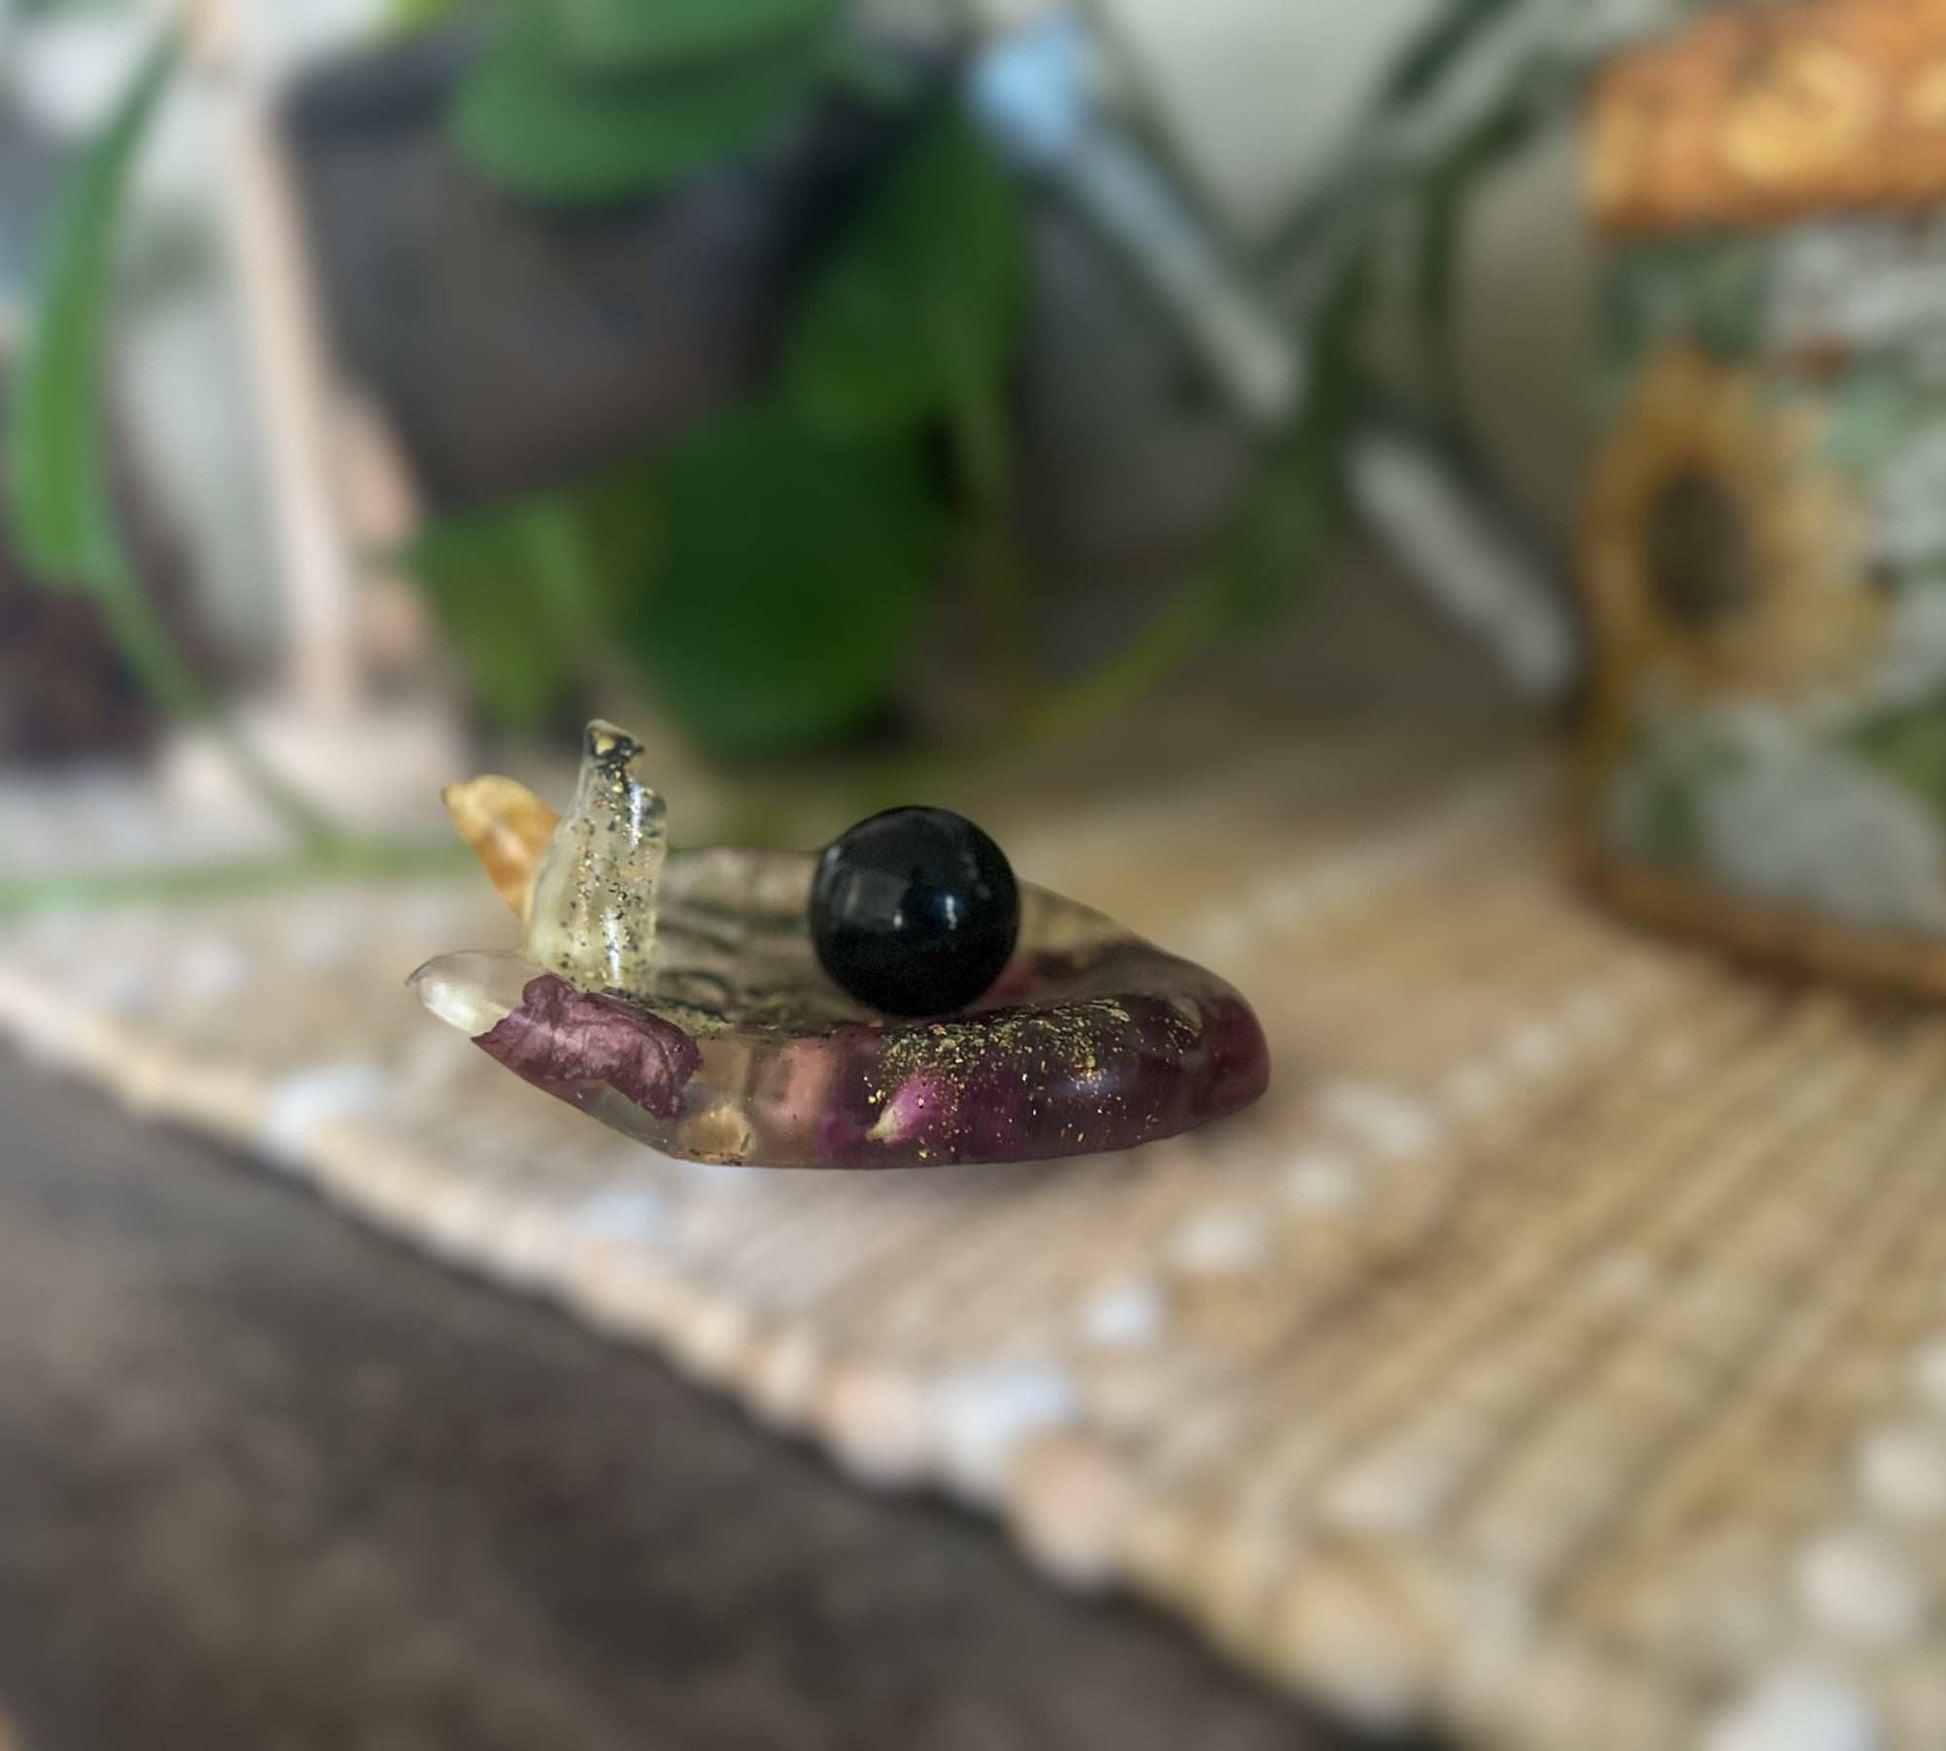 Obsidian Crystal Sphere & Rose Petal Hand - Blooms of Protection